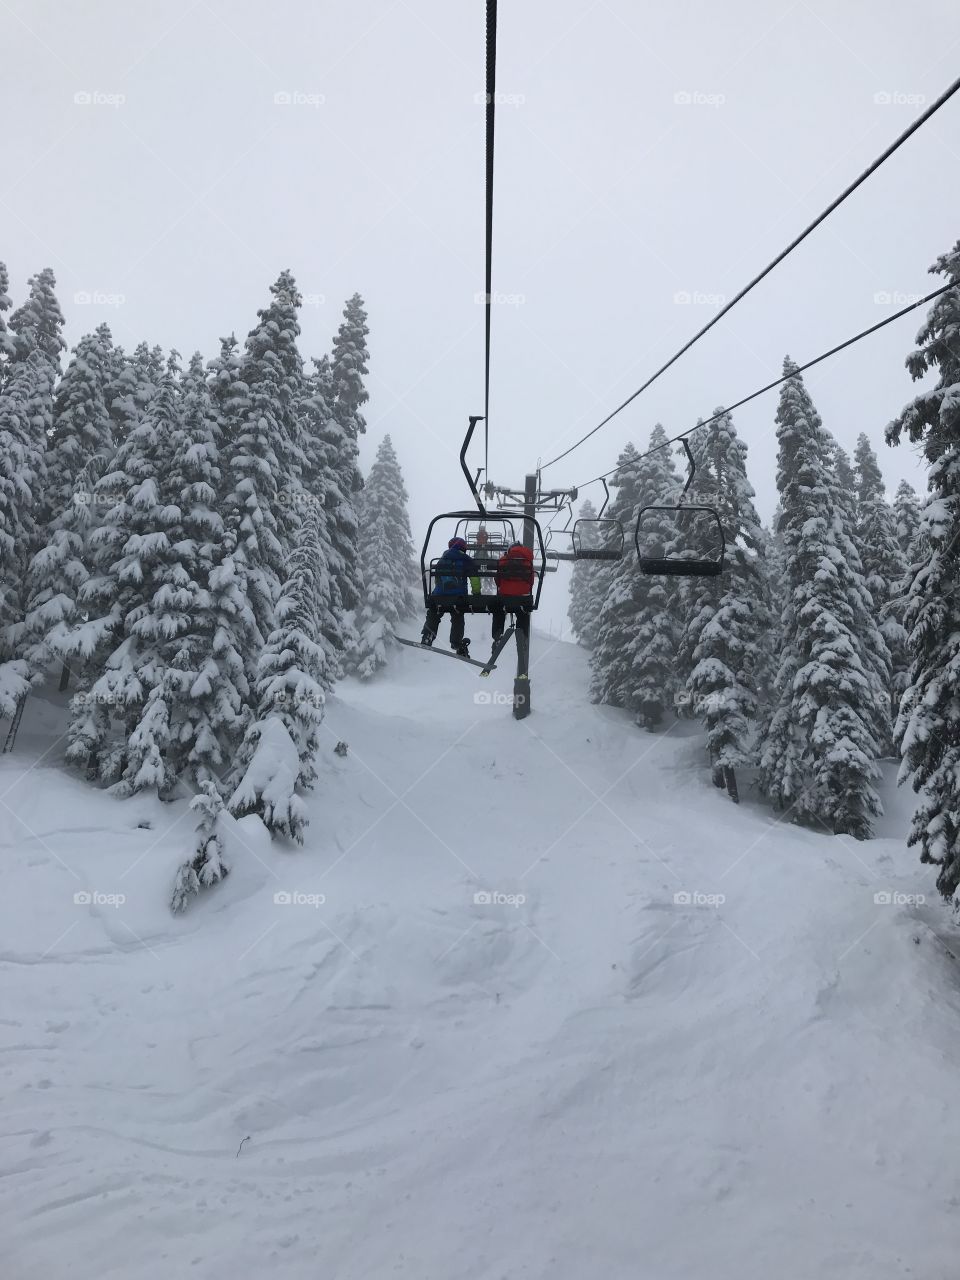 Steven pass, photo on the chair lift, snowboarding in the winter with good snow 